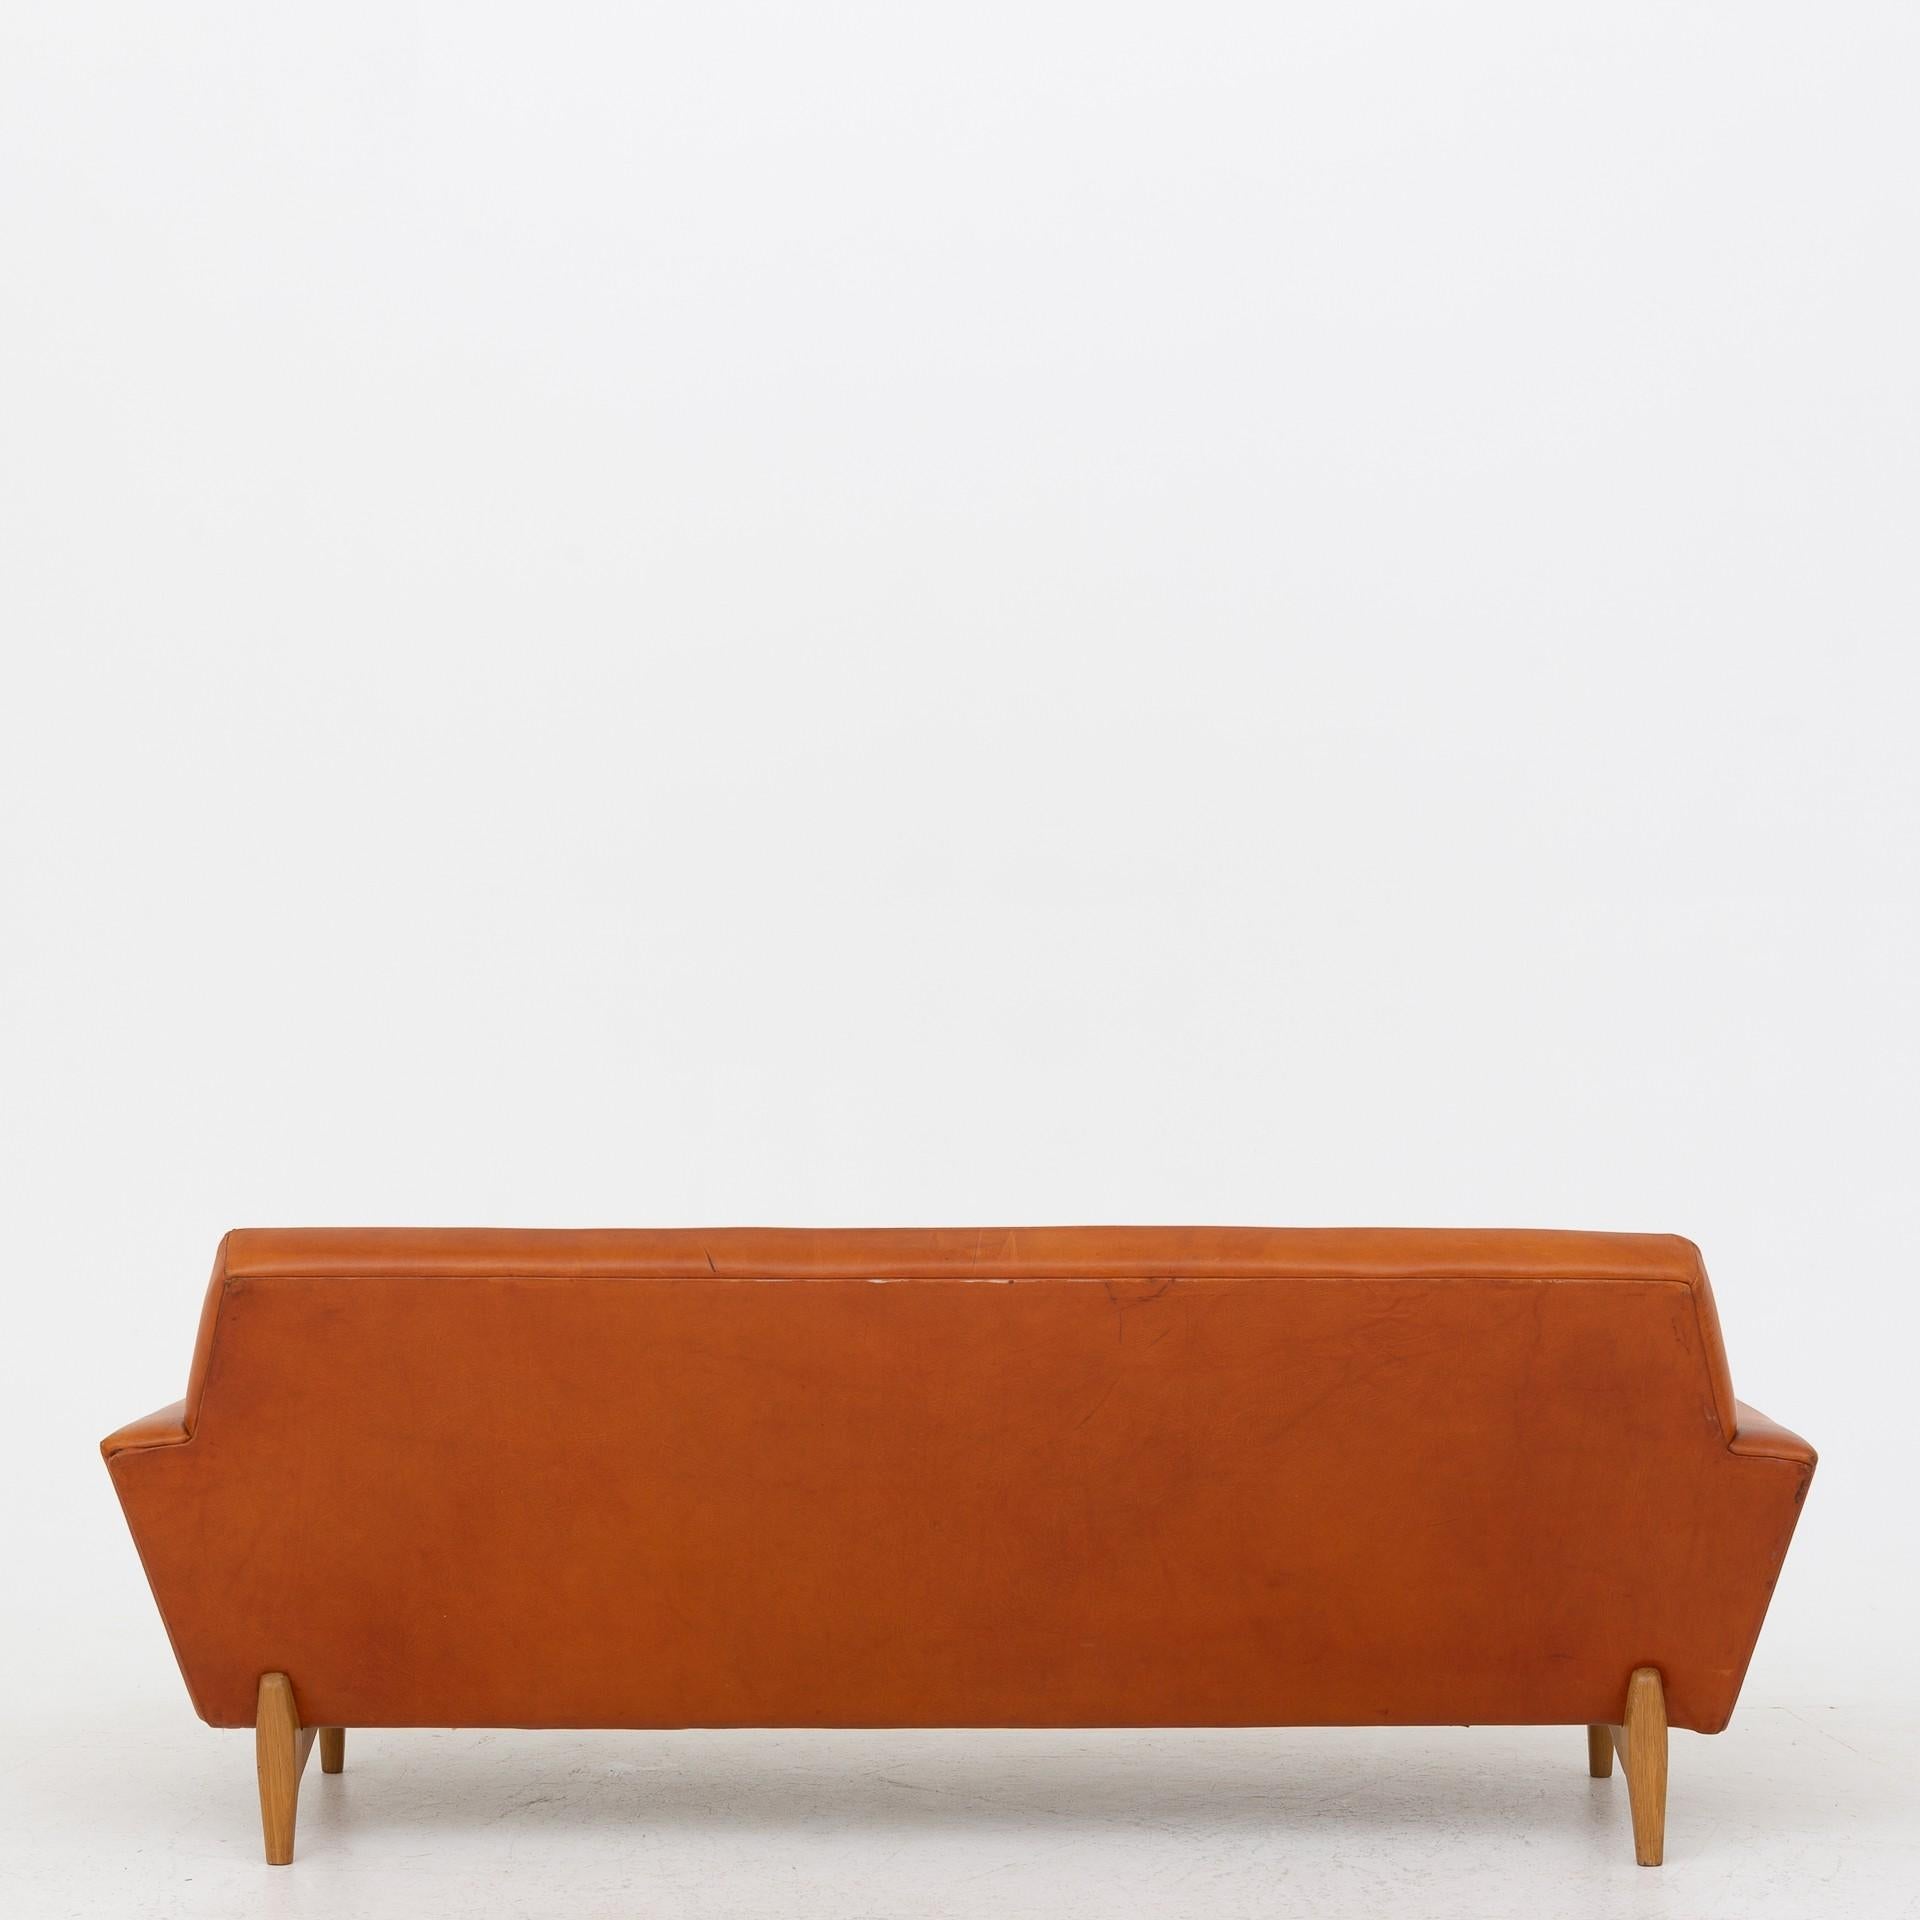 'Disponenten' three-seat sofa in patinated brown natural leather with legs of oak. Maker Oluf Persson OPE.